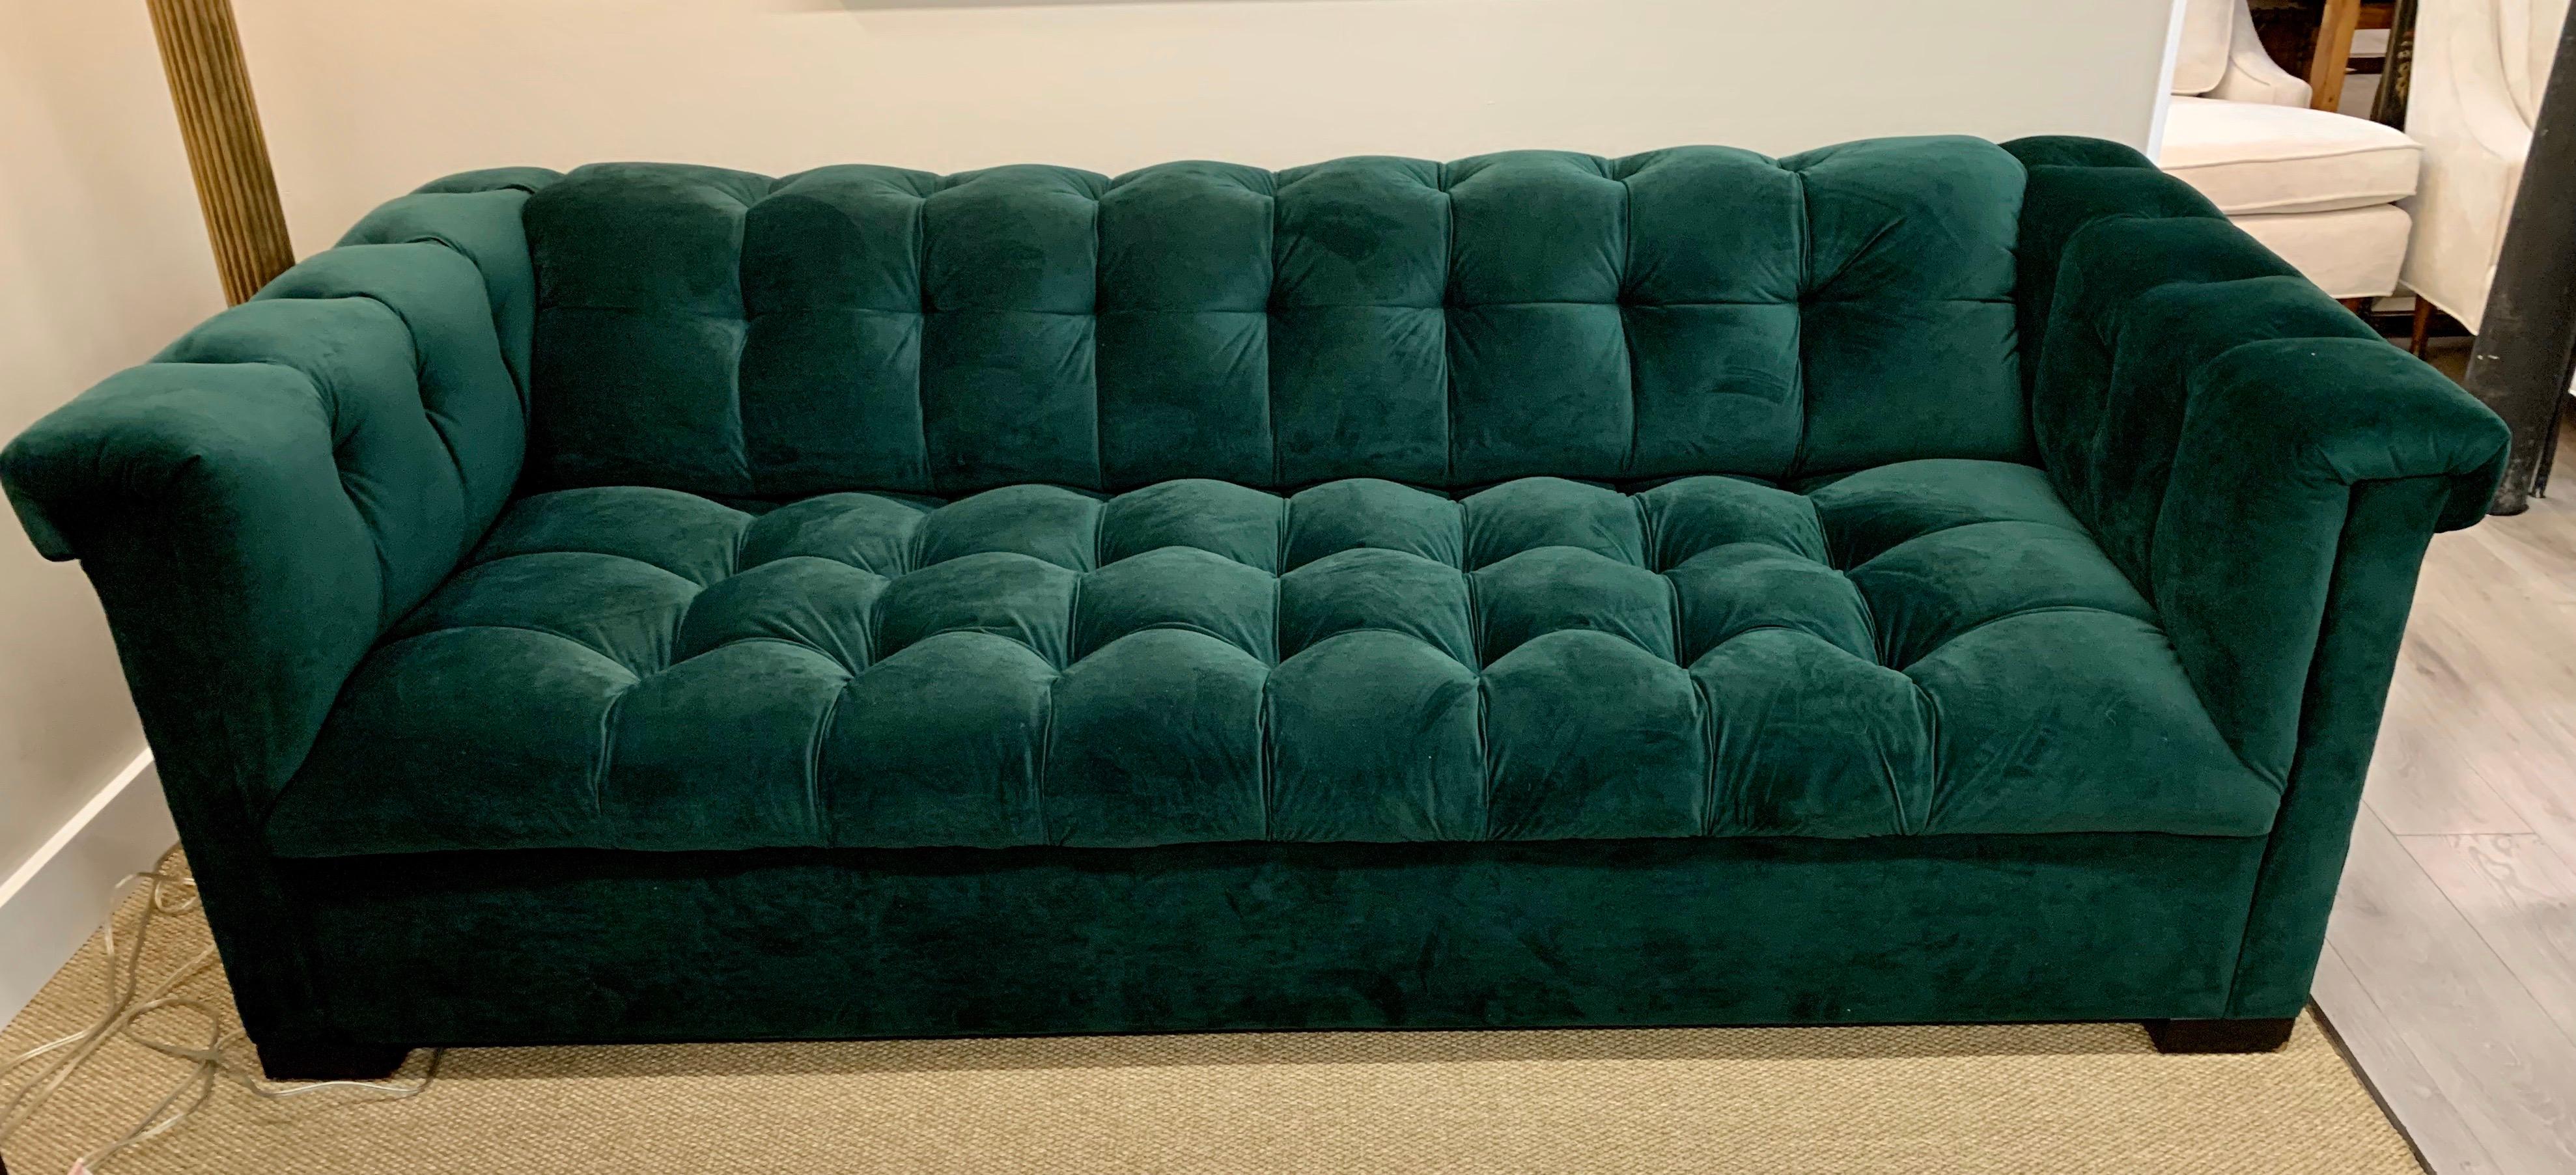 Bespoke Custom British Racing Green Velvet Chesterfield Tufted Sofa In Excellent Condition In West Hartford, CT